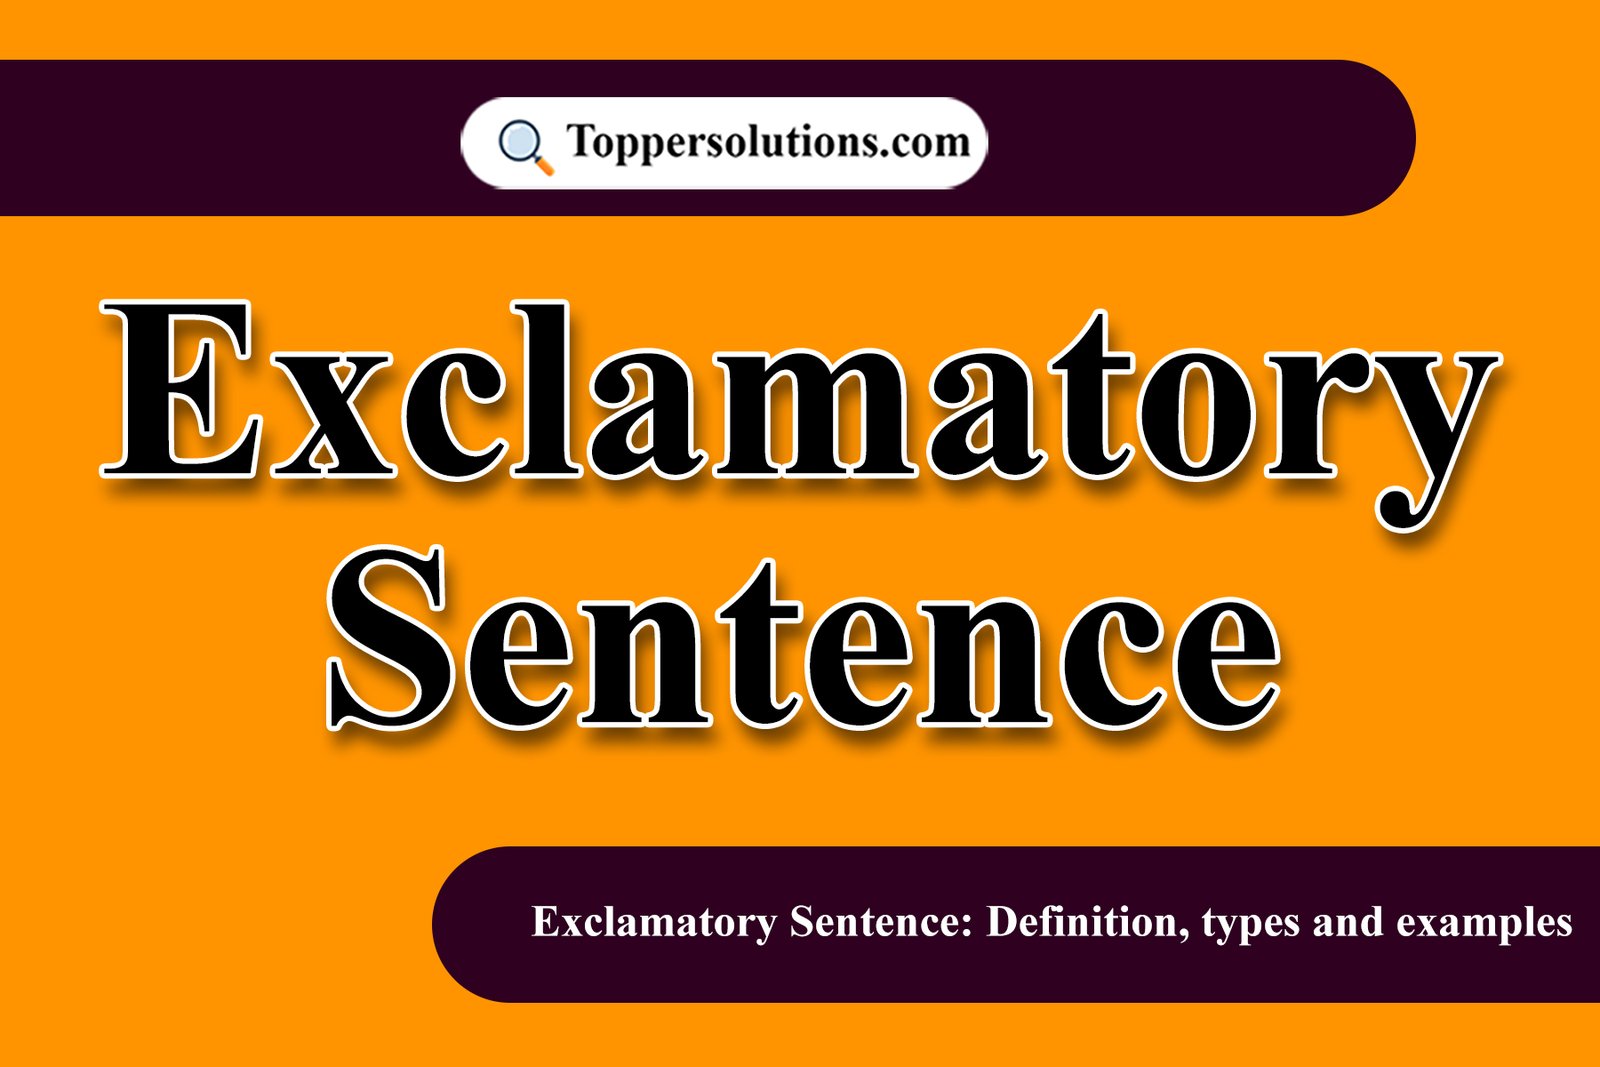 What is an Exclamatory Sentence?